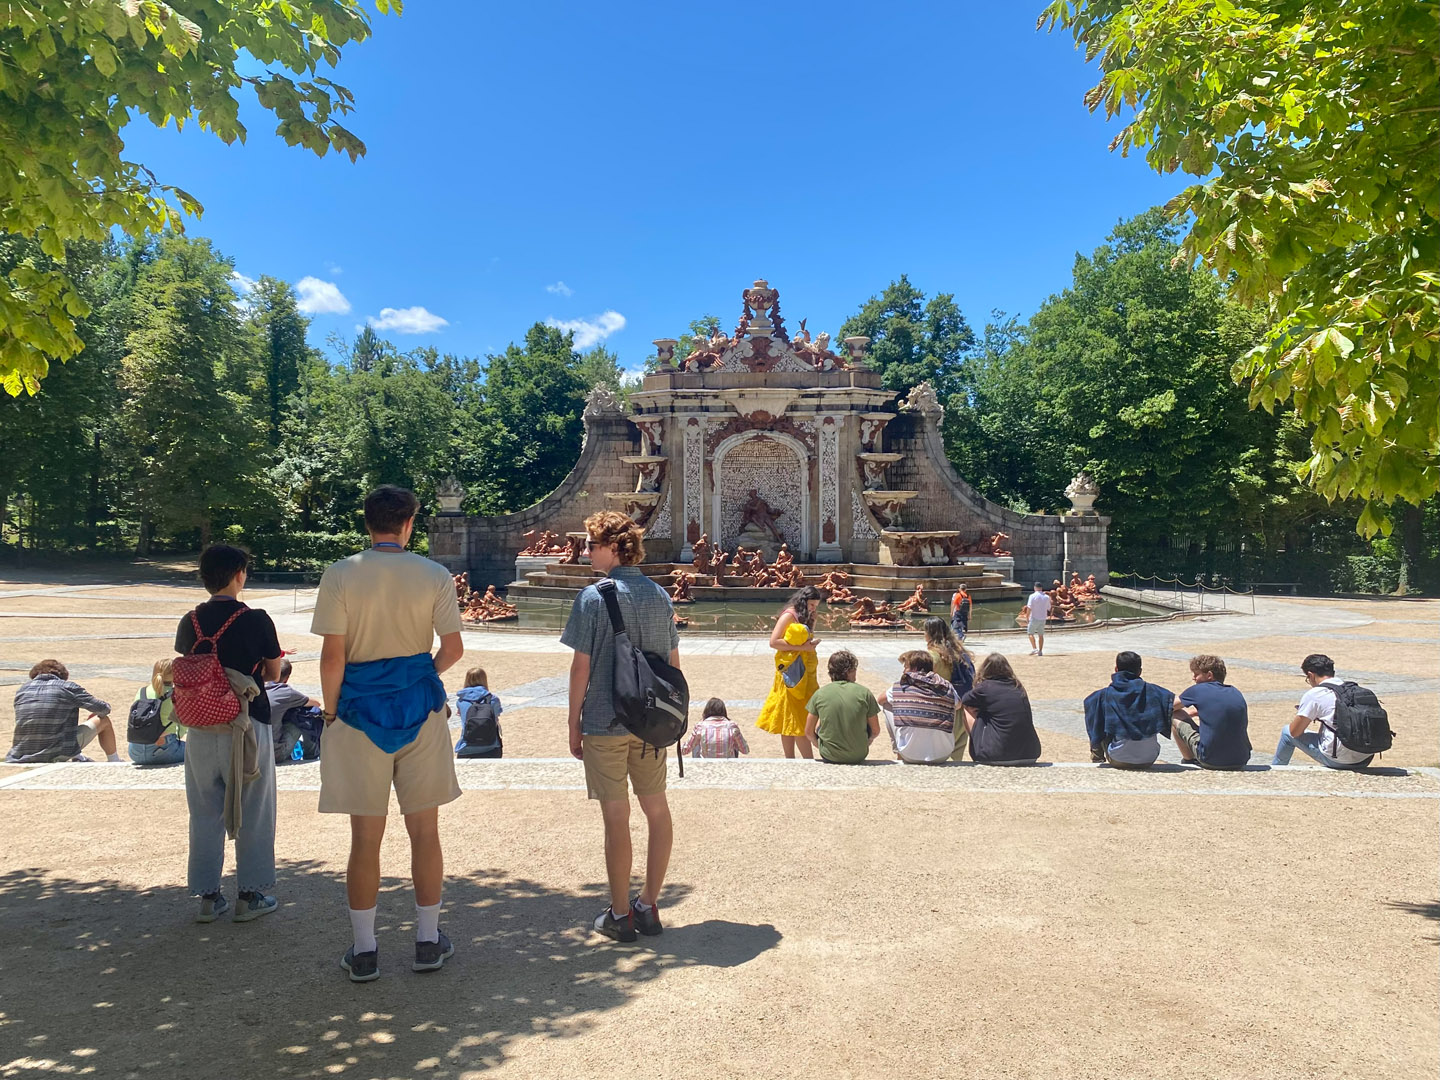 Near the end of the tour of the Royal Palace of La Granja de San Ildefonso, students rest in front of an ornate water feature. Photo by Zeke Lloyd ’24